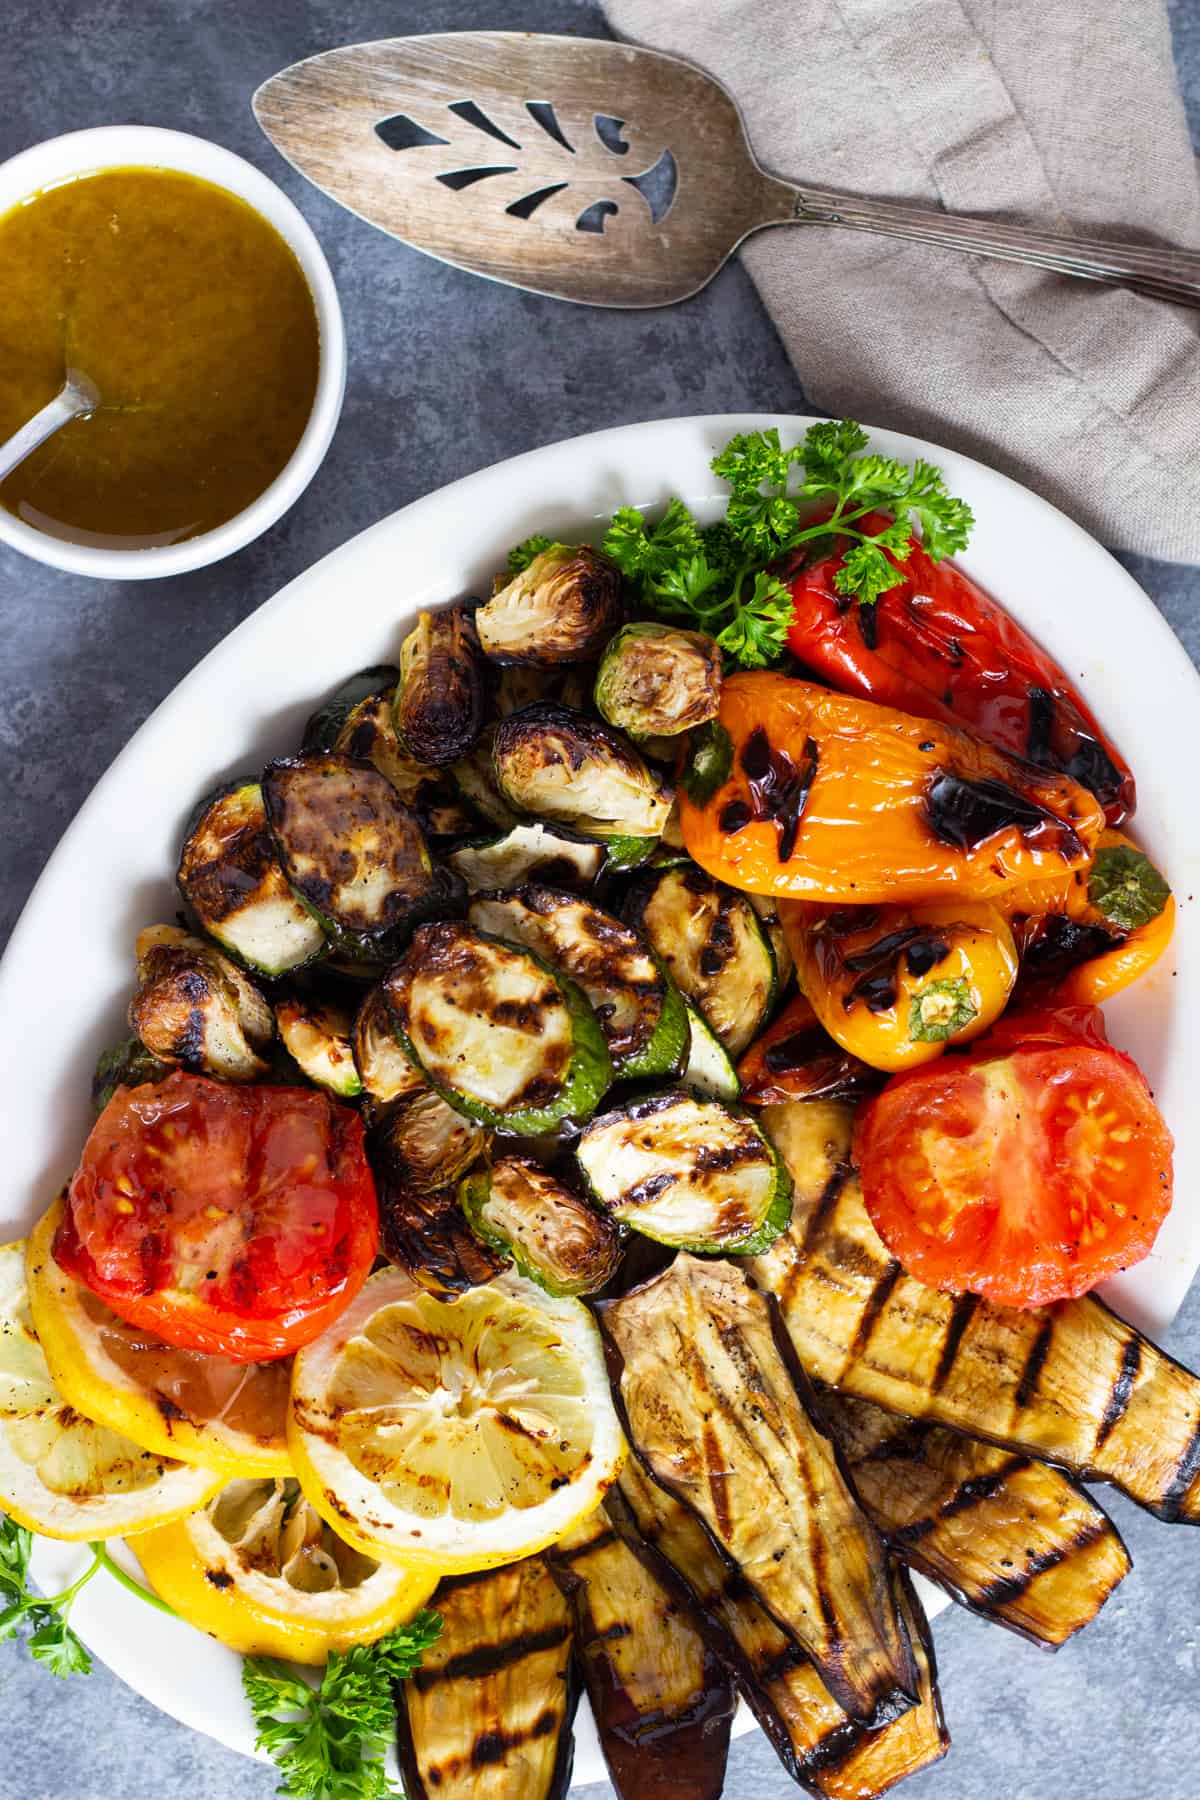 Grilled vegetable platter with a zesty dressing.